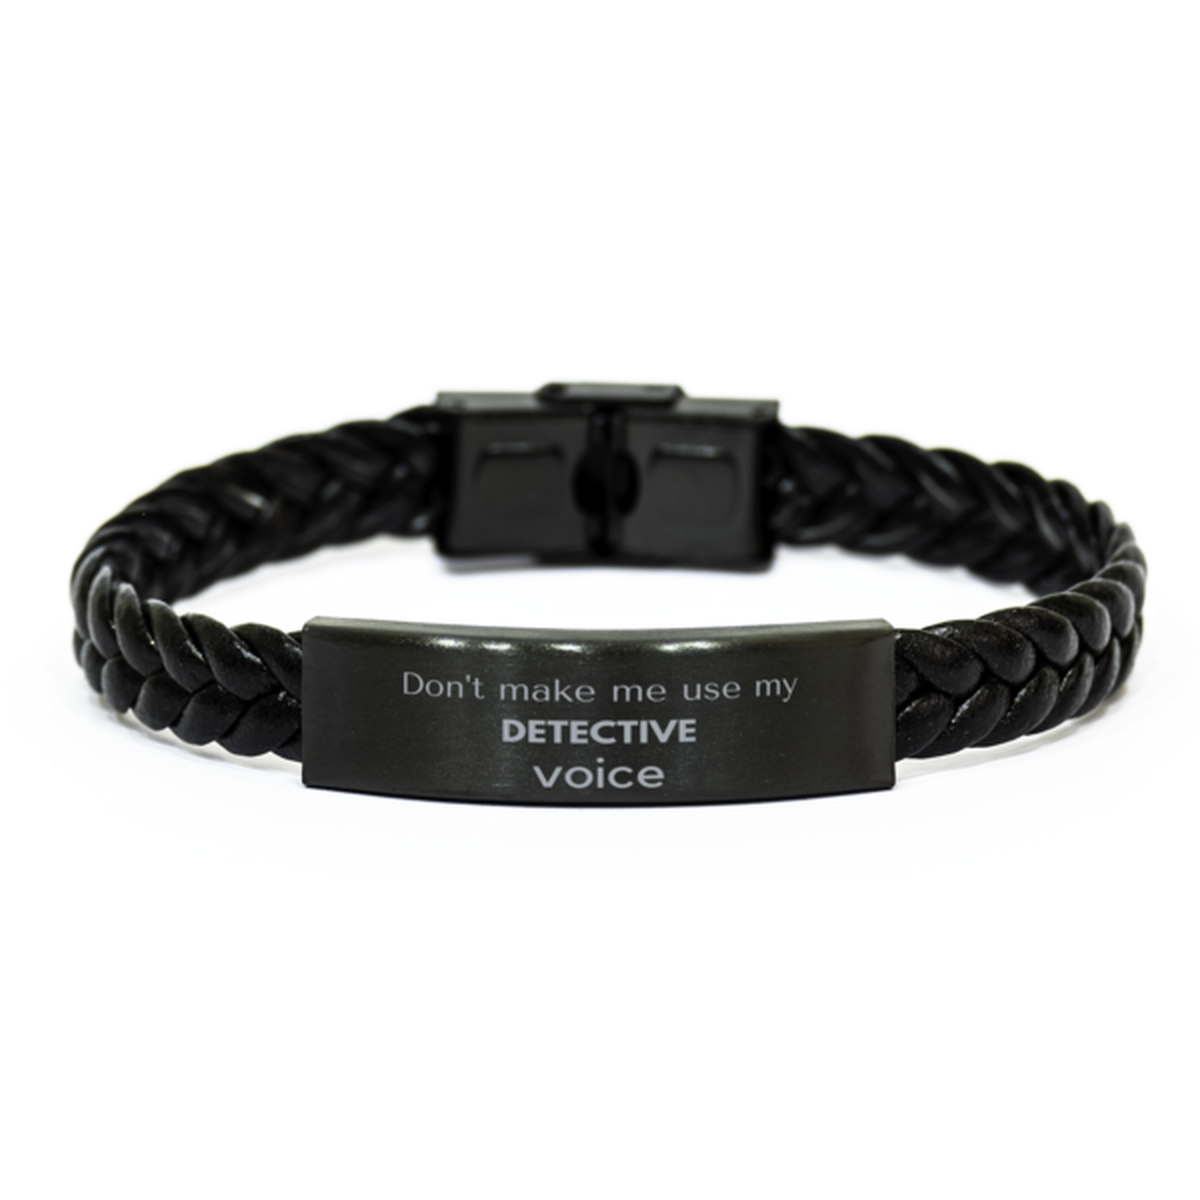 Don't make me use my Detective voice, Sarcasm Detective Gifts, Christmas Detective Braided Leather Bracelet Birthday Unique Gifts For Detective Coworkers, Men, Women, Colleague, Friends